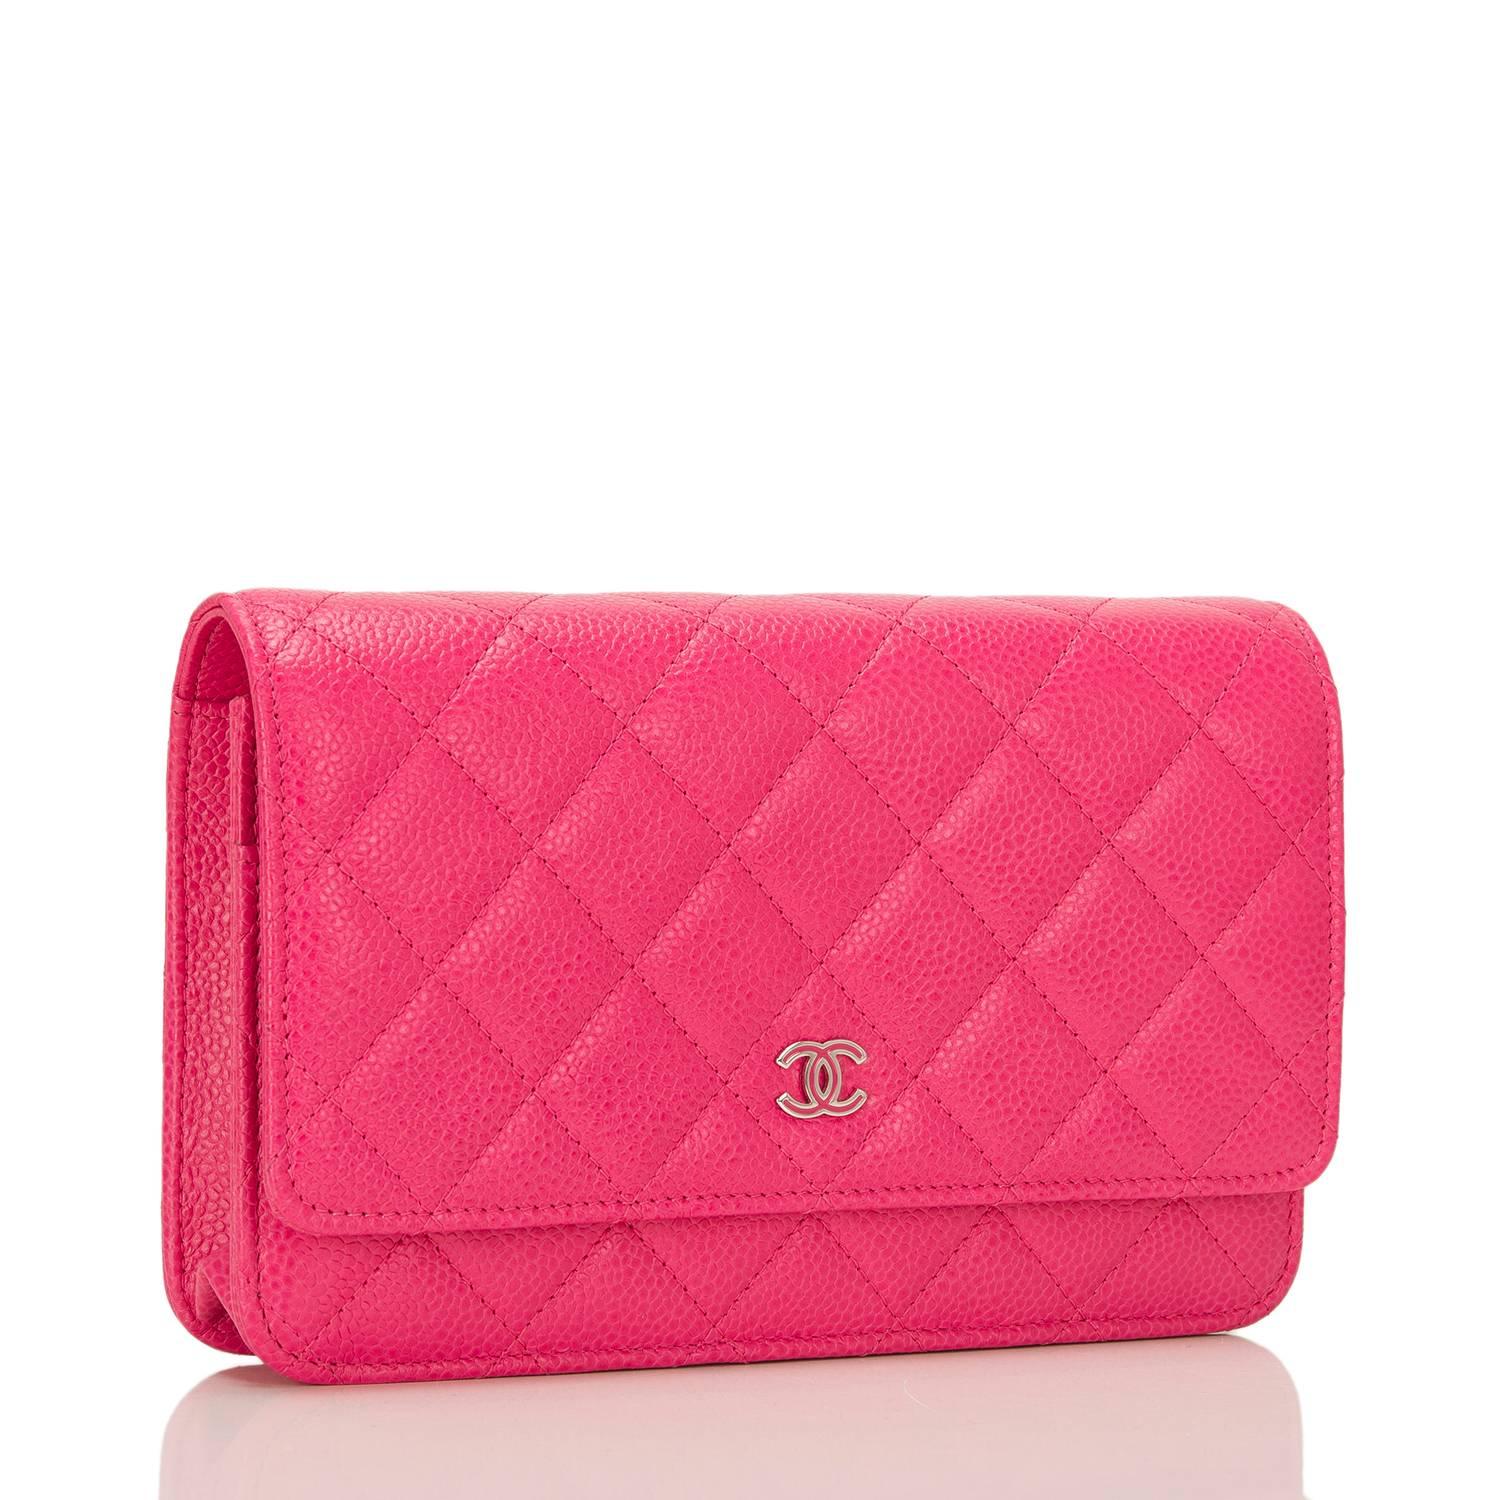 This timeless WOC in a bright and beautiful fuchsia color caviar leather features signature Chanel quilting, front flap with CC charm and hidden snap closure, expandable sides and bottom, half moon rear pocket and interwoven silver tone chain and